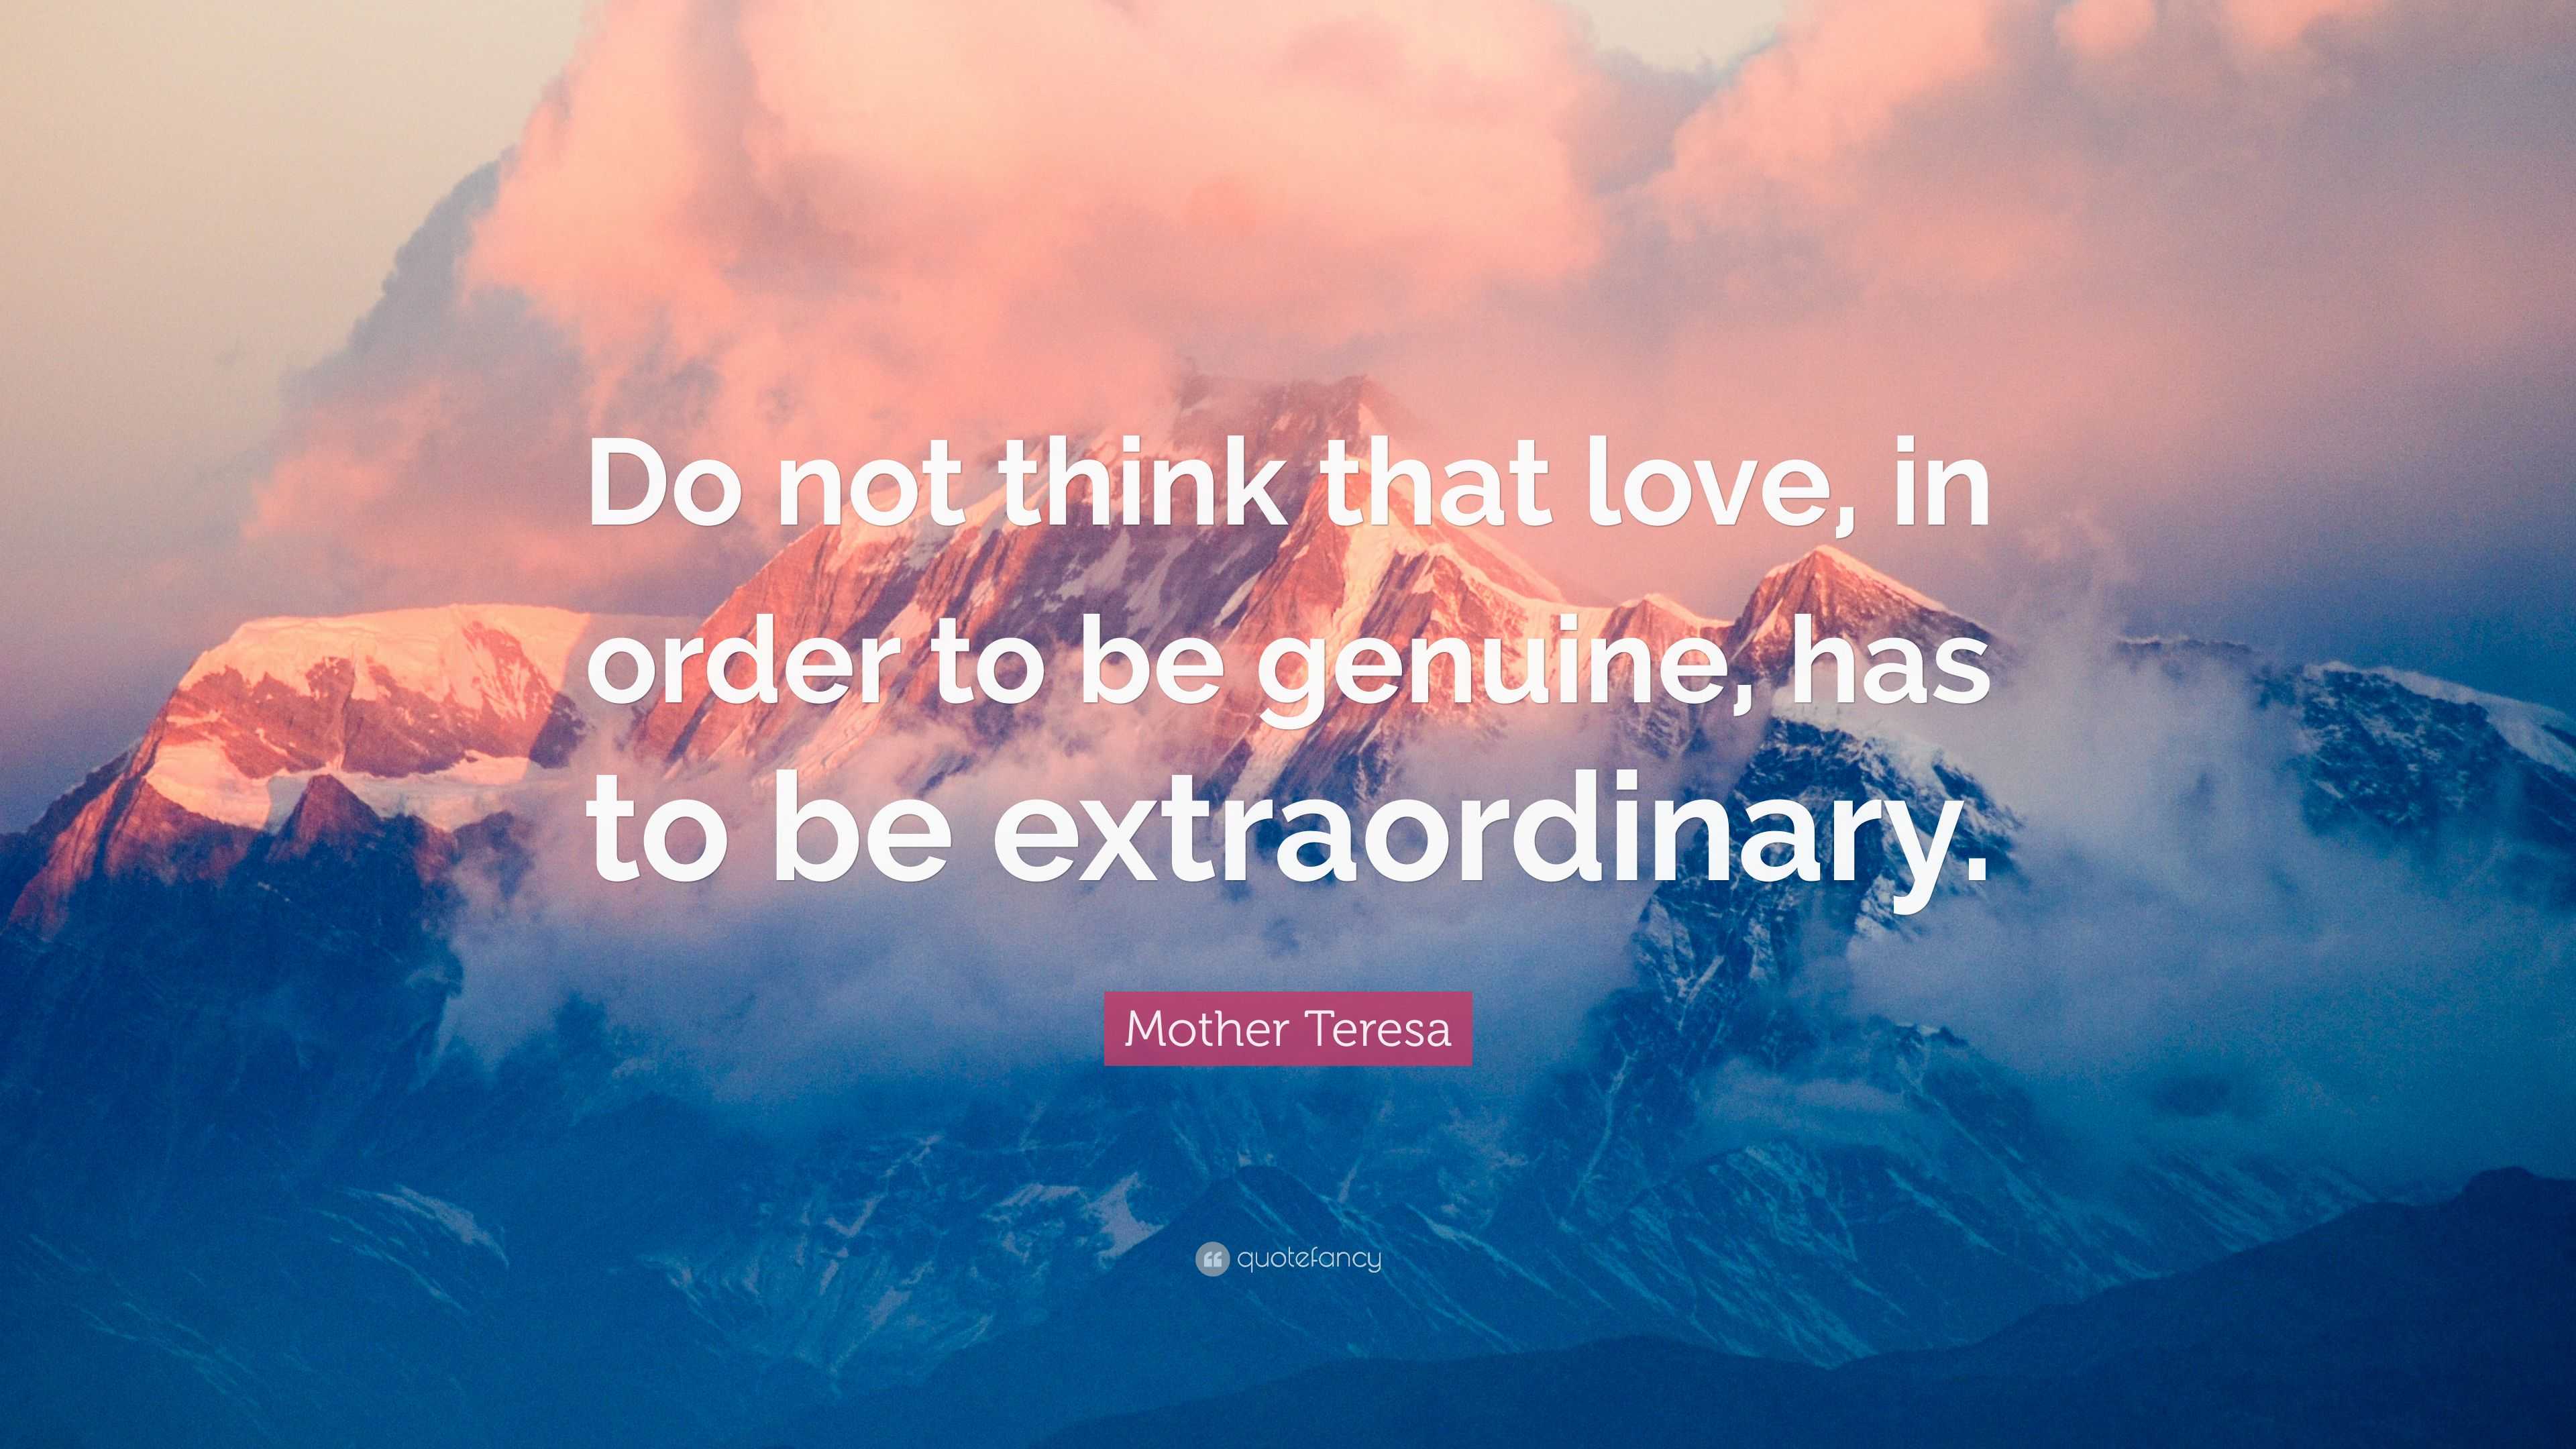 Mother Teresa Quote “Do not think that love in order to be genuine